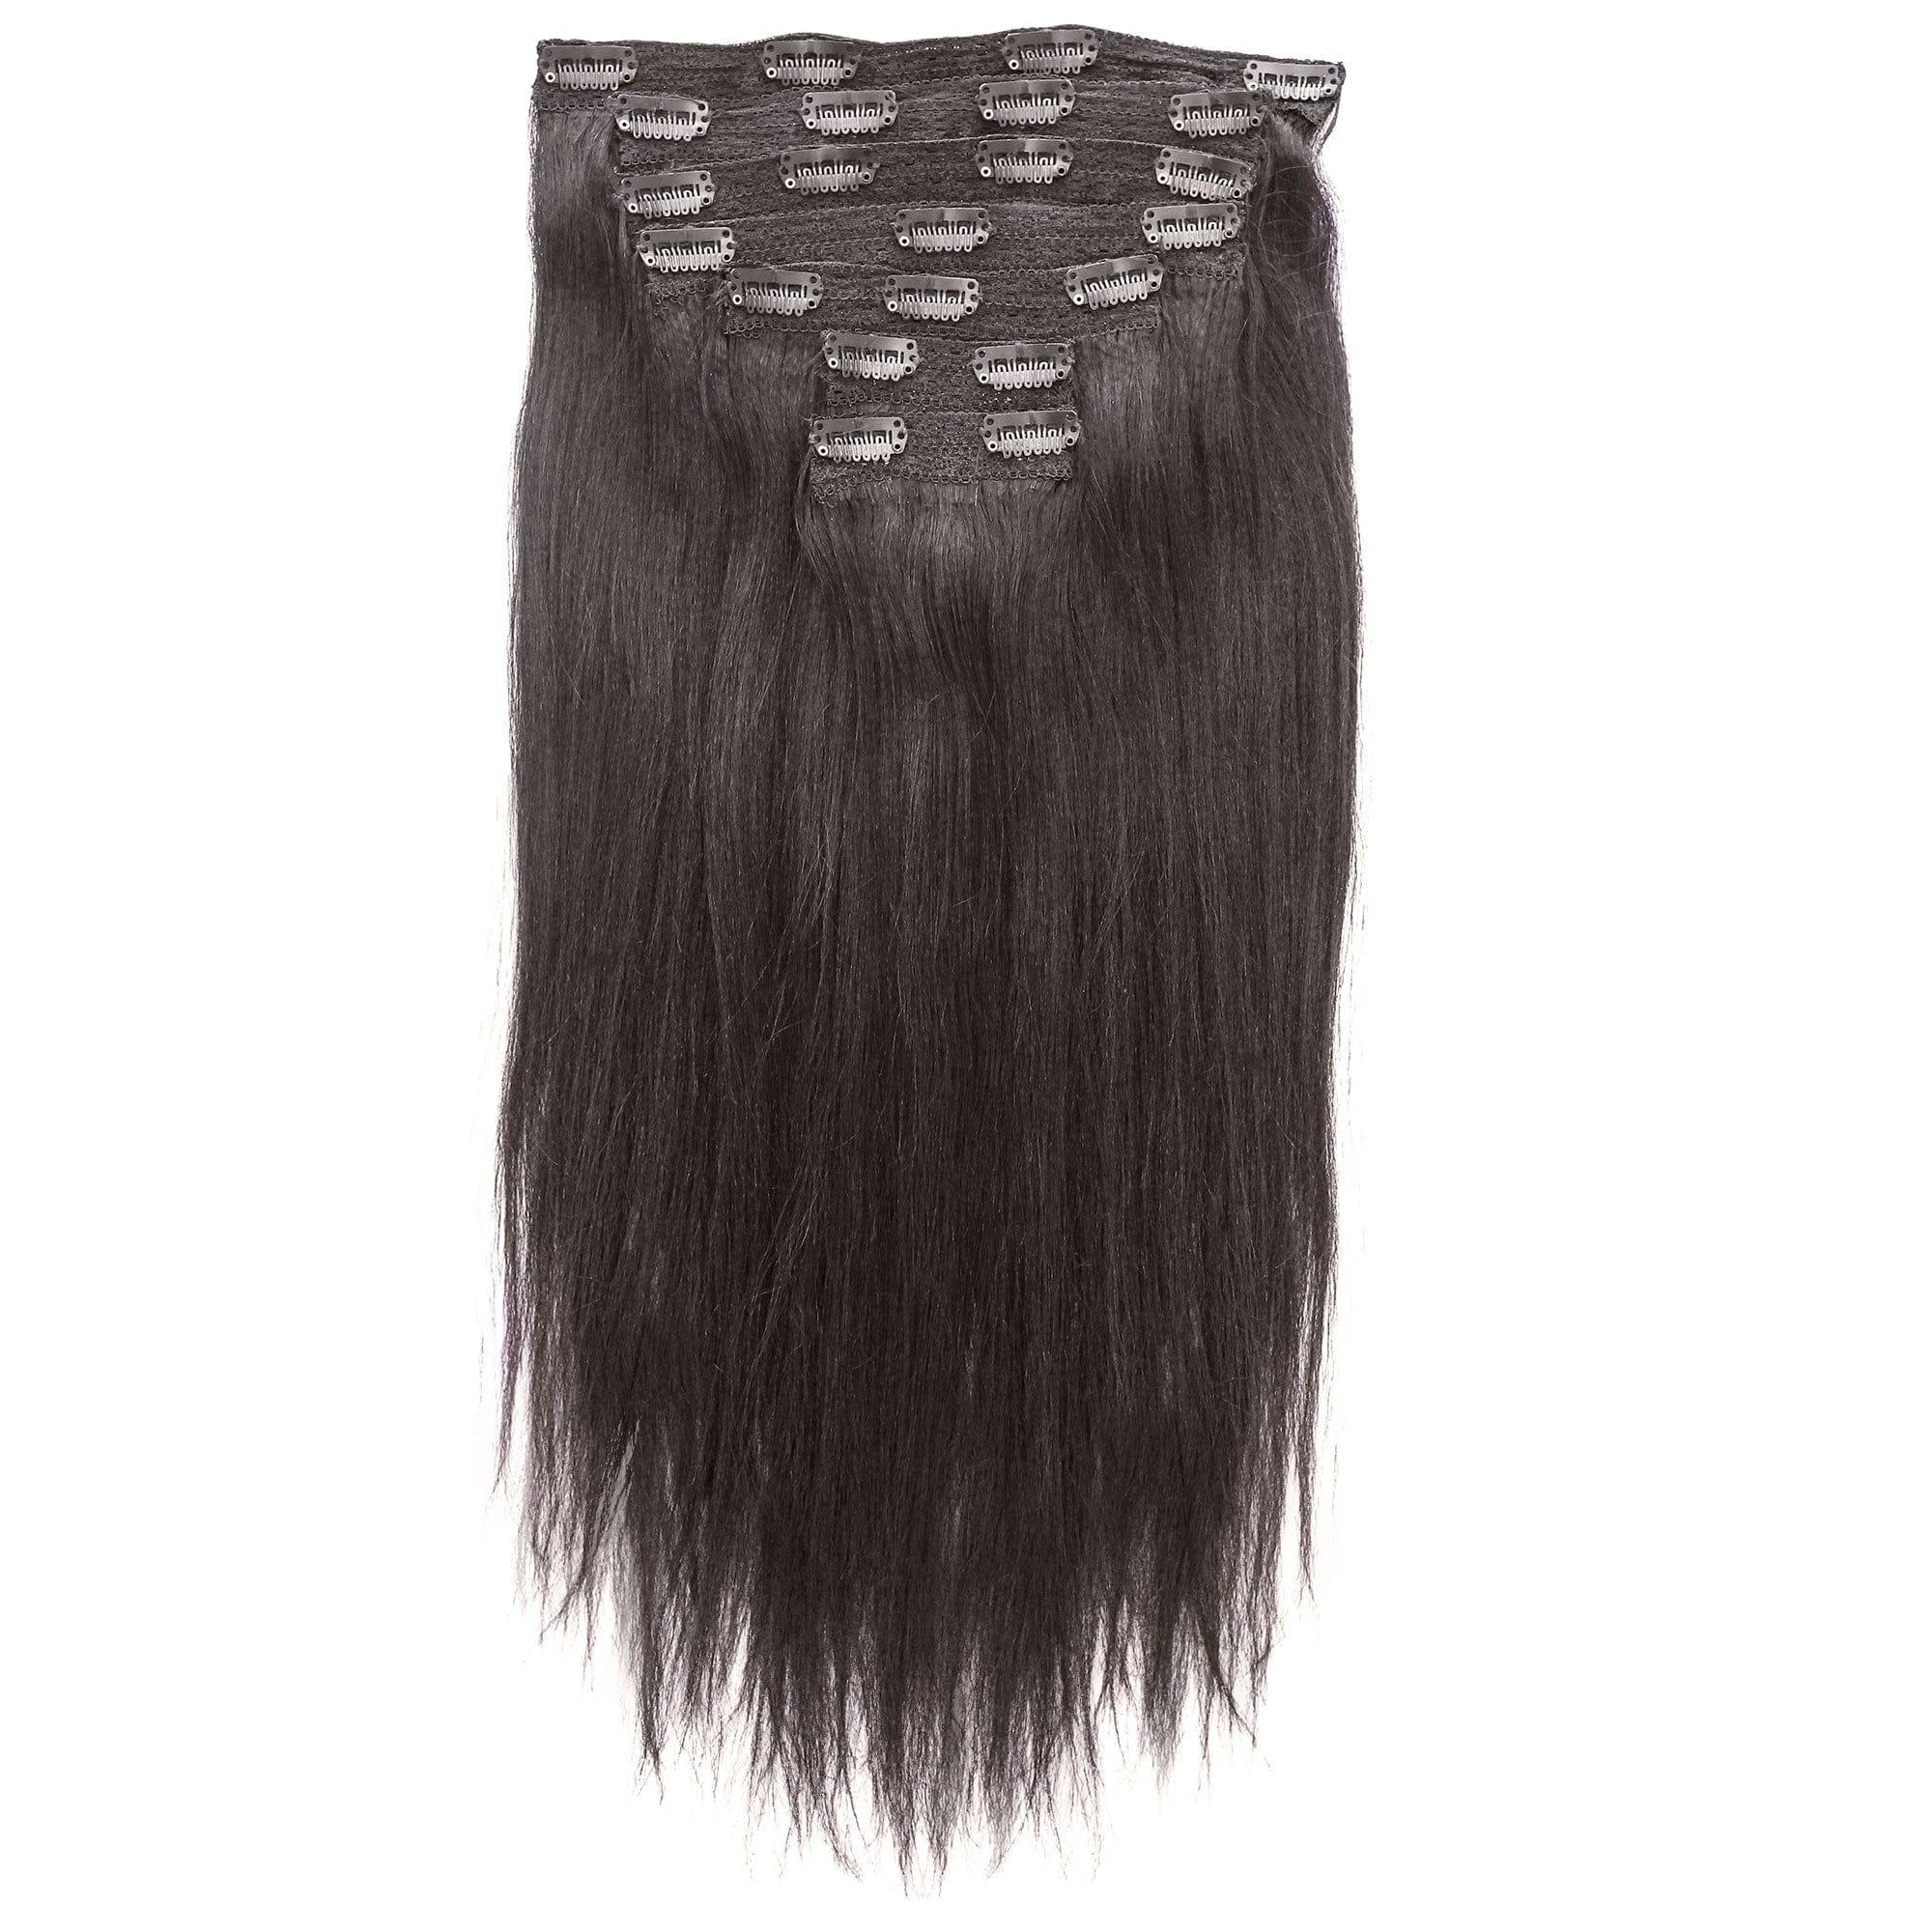 Best Human Hair Extensions Items For Glowing 2023 | K-hair